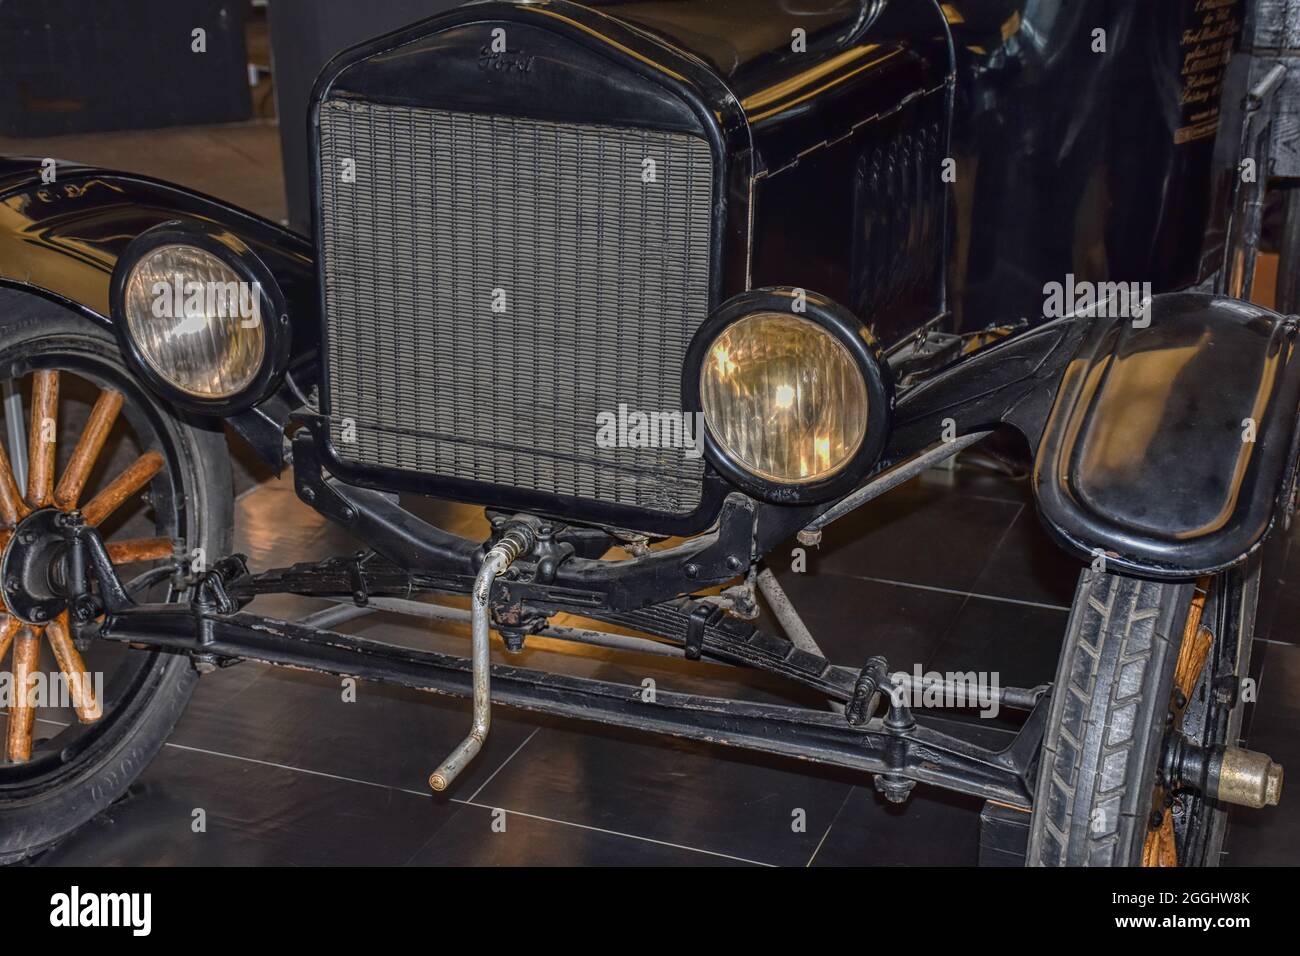 Scheinwerfer High Resolution Stock Photography and Images - Alamy